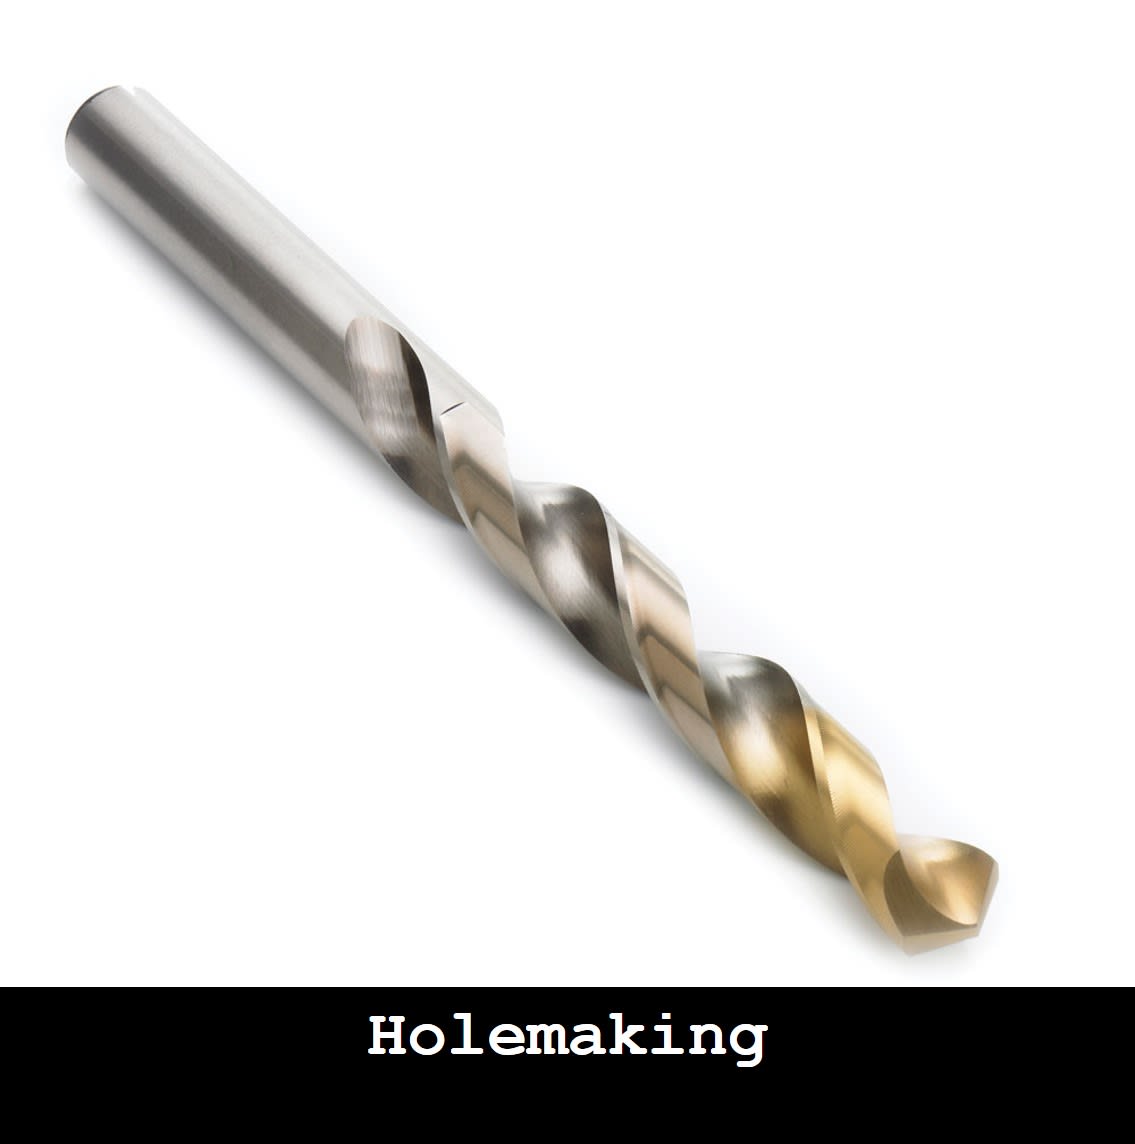 Holemaking | Smith Industrial Supply | Port Colborne Industrial Supply